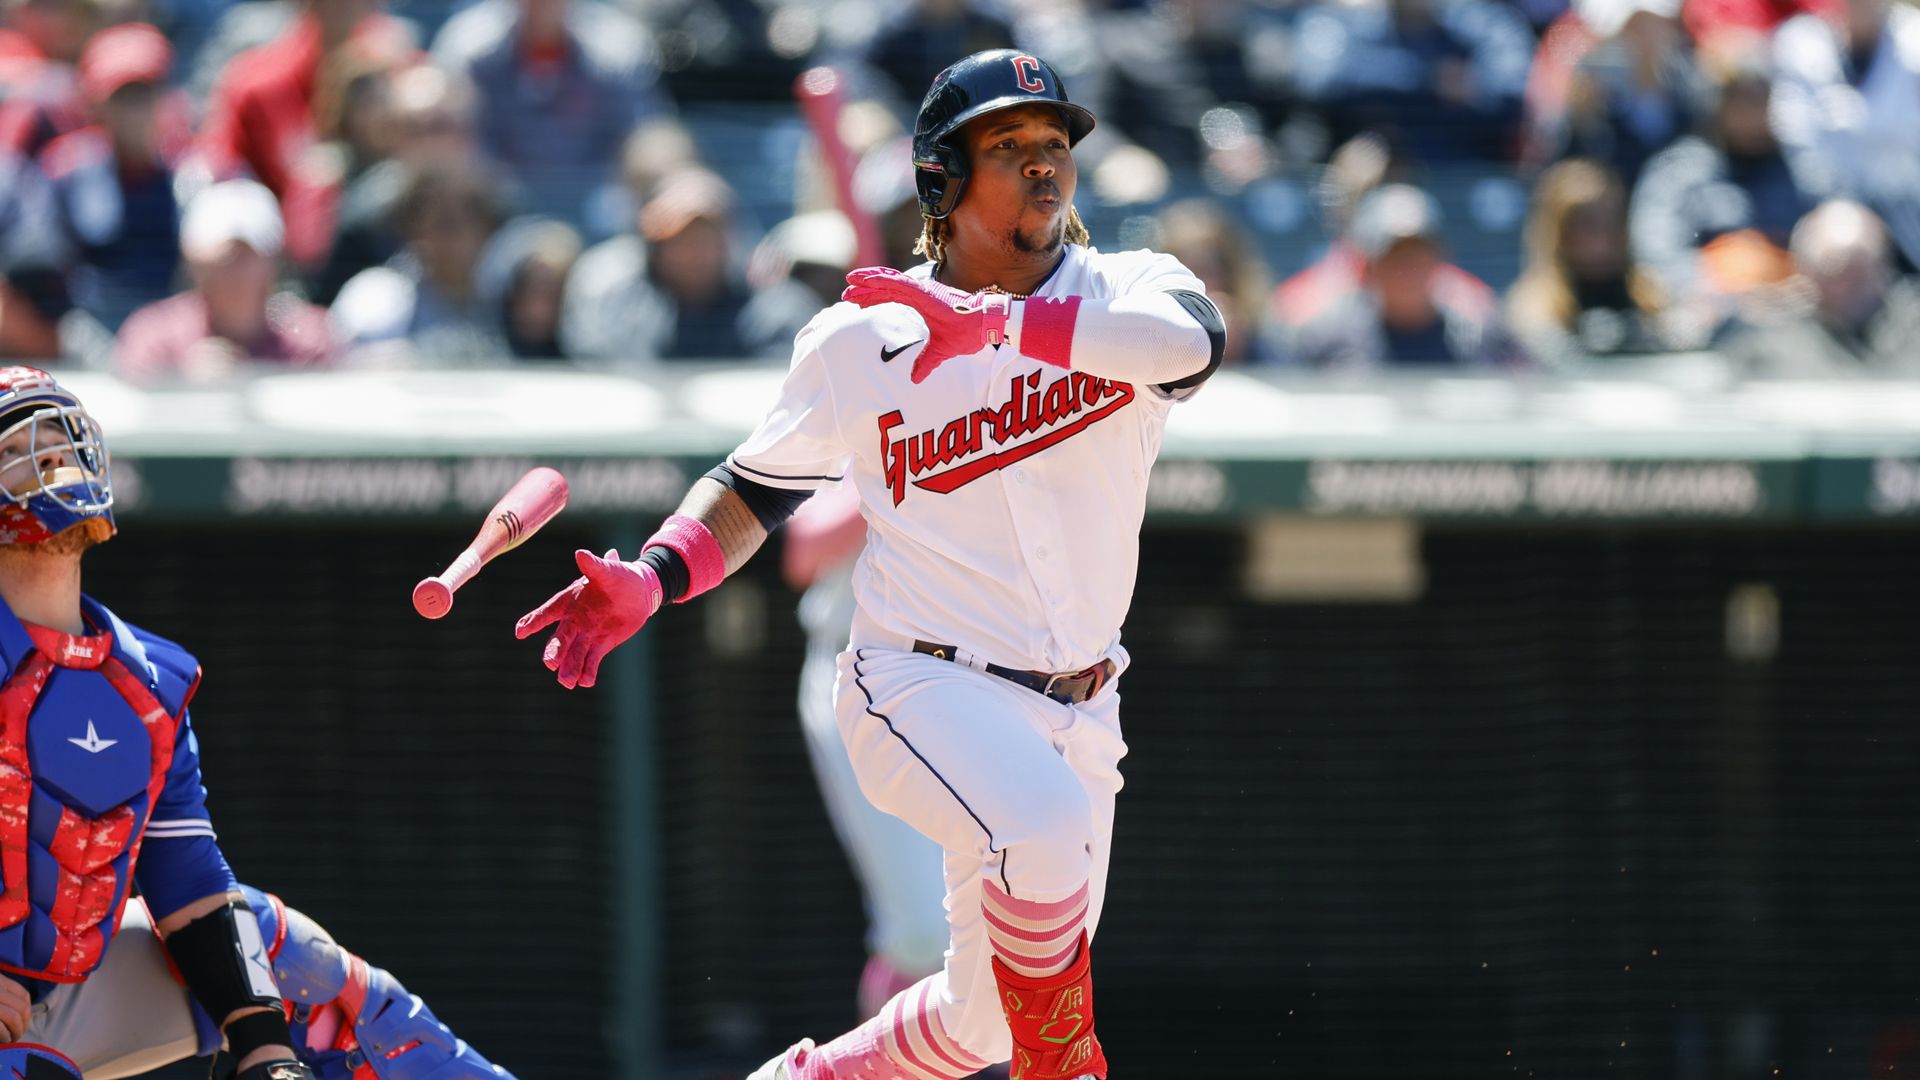 Cleveland Guaridans' Jose Ramirez drops his bat after swinging and hitting the ball into the air as a catcher looks on.